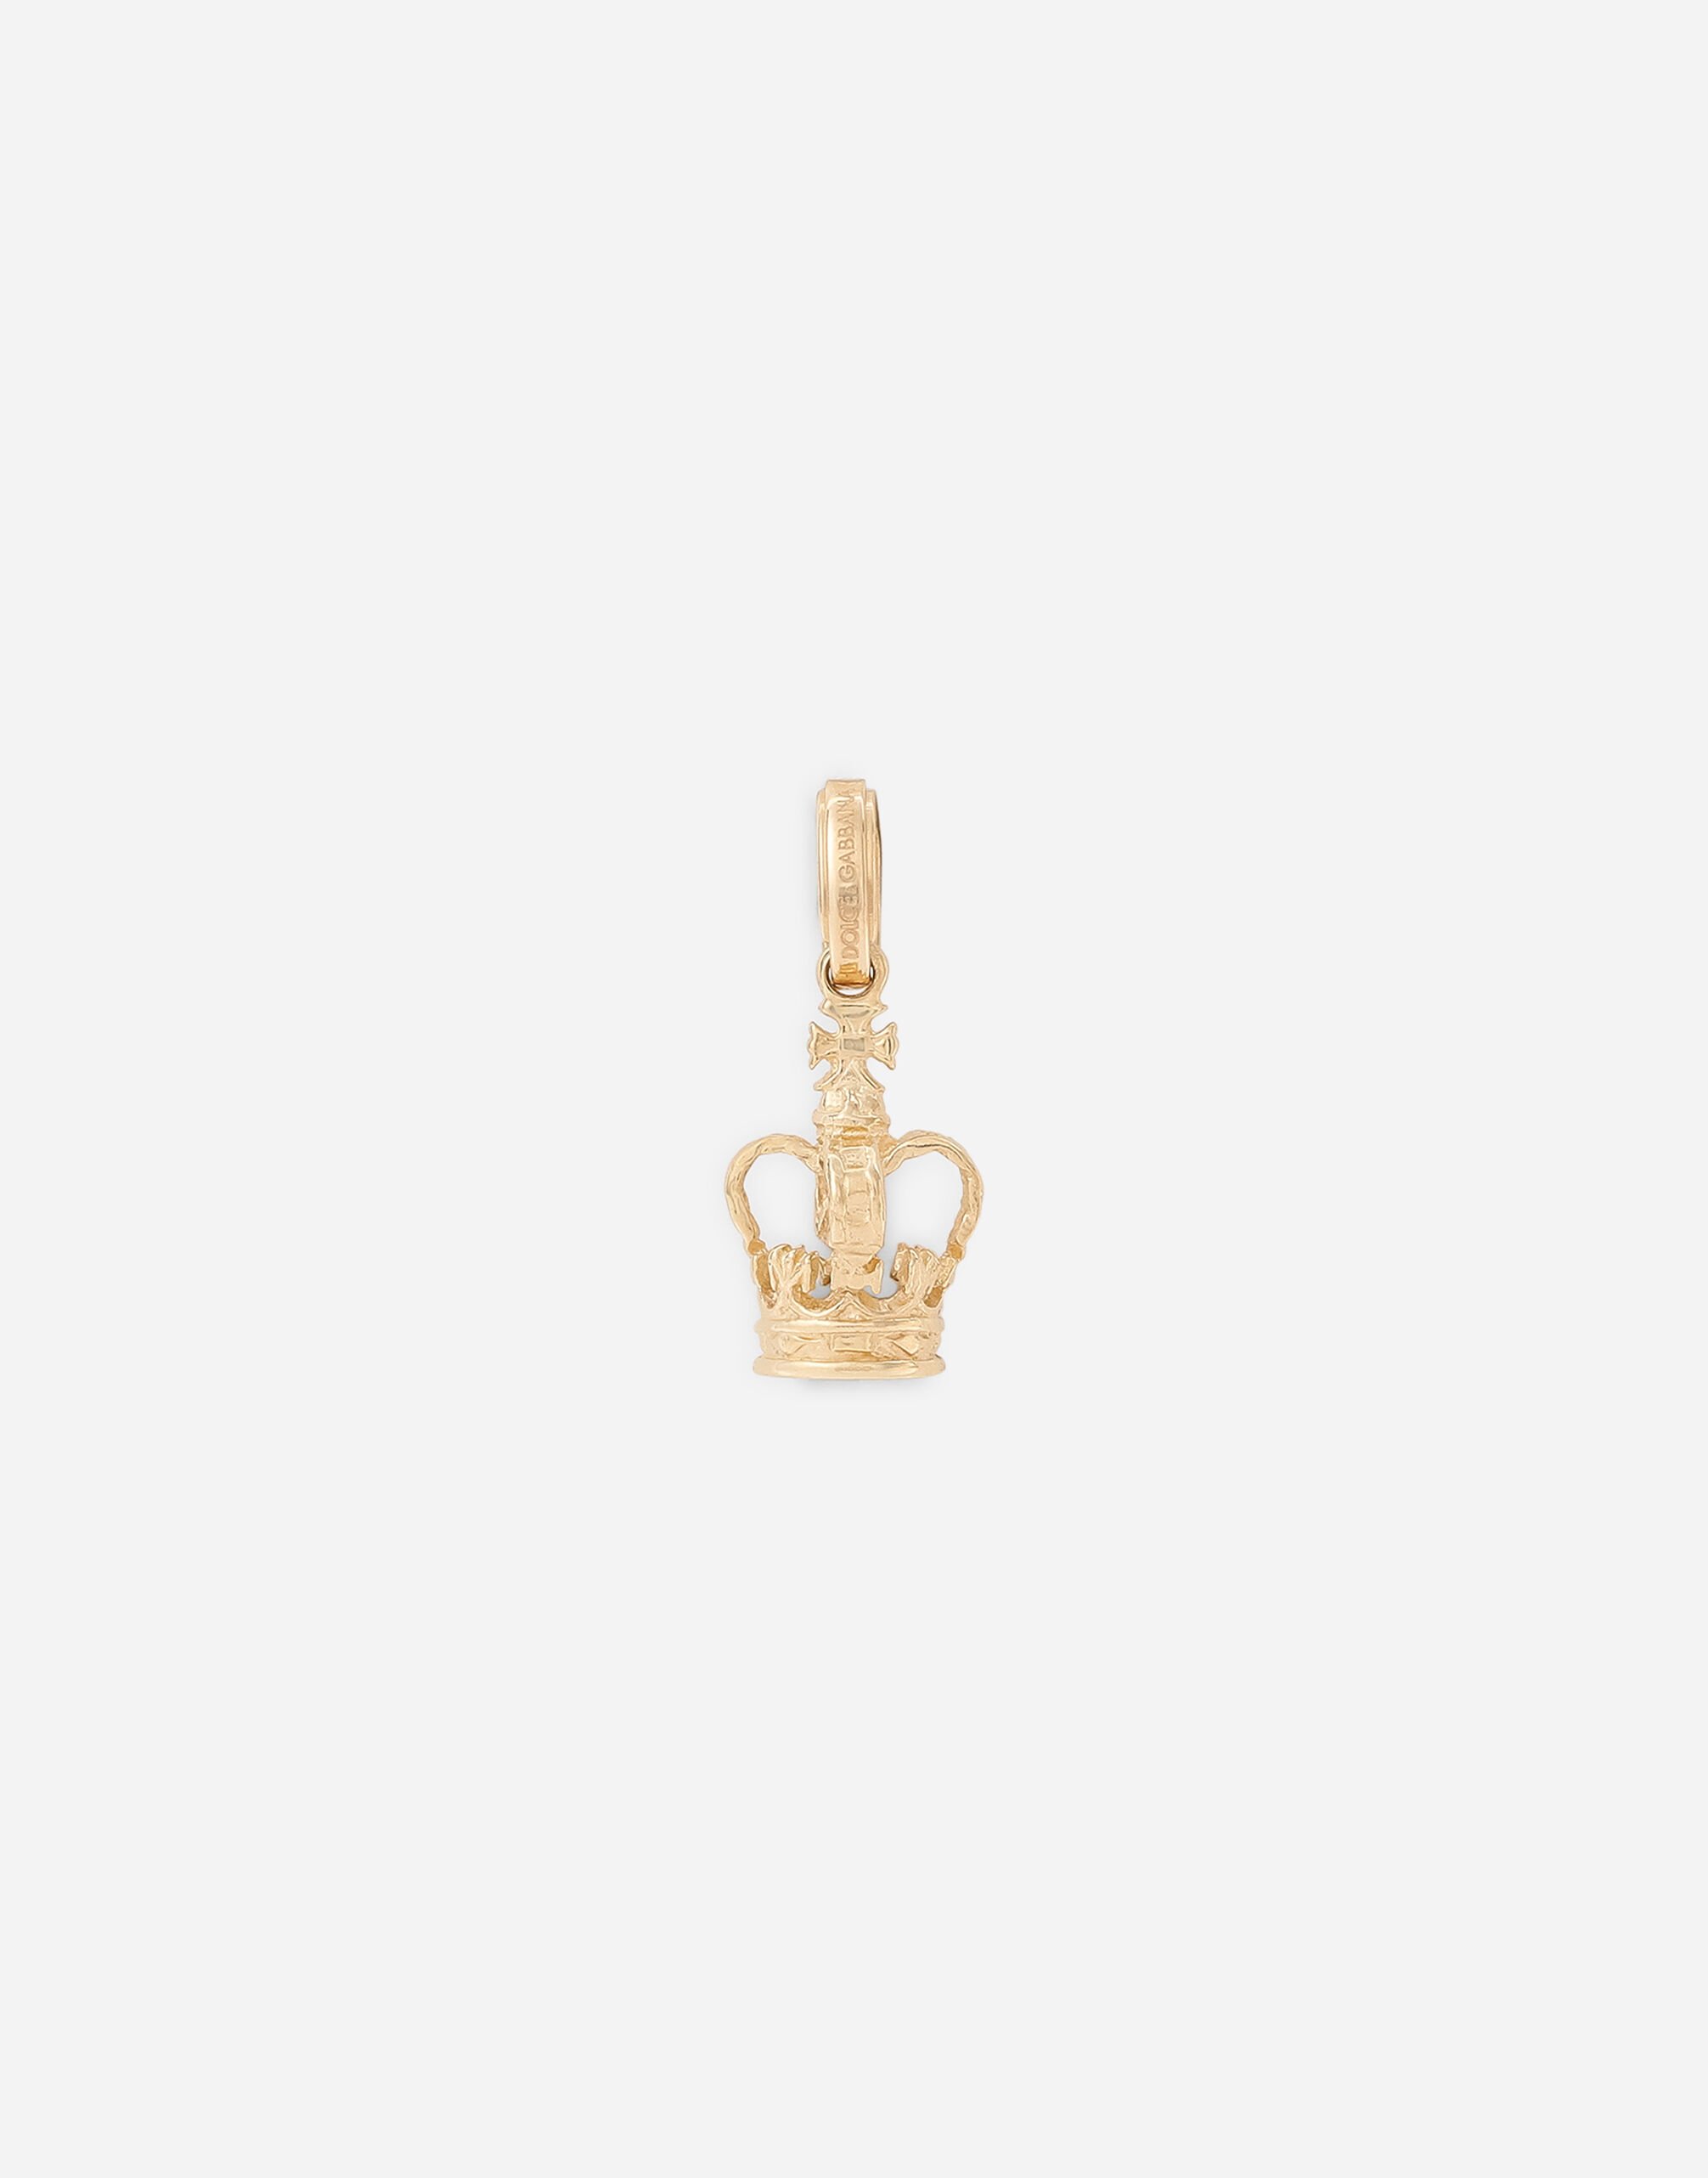 ${brand} Crown Yellow gold charm ${colorDescription} ${masterID}